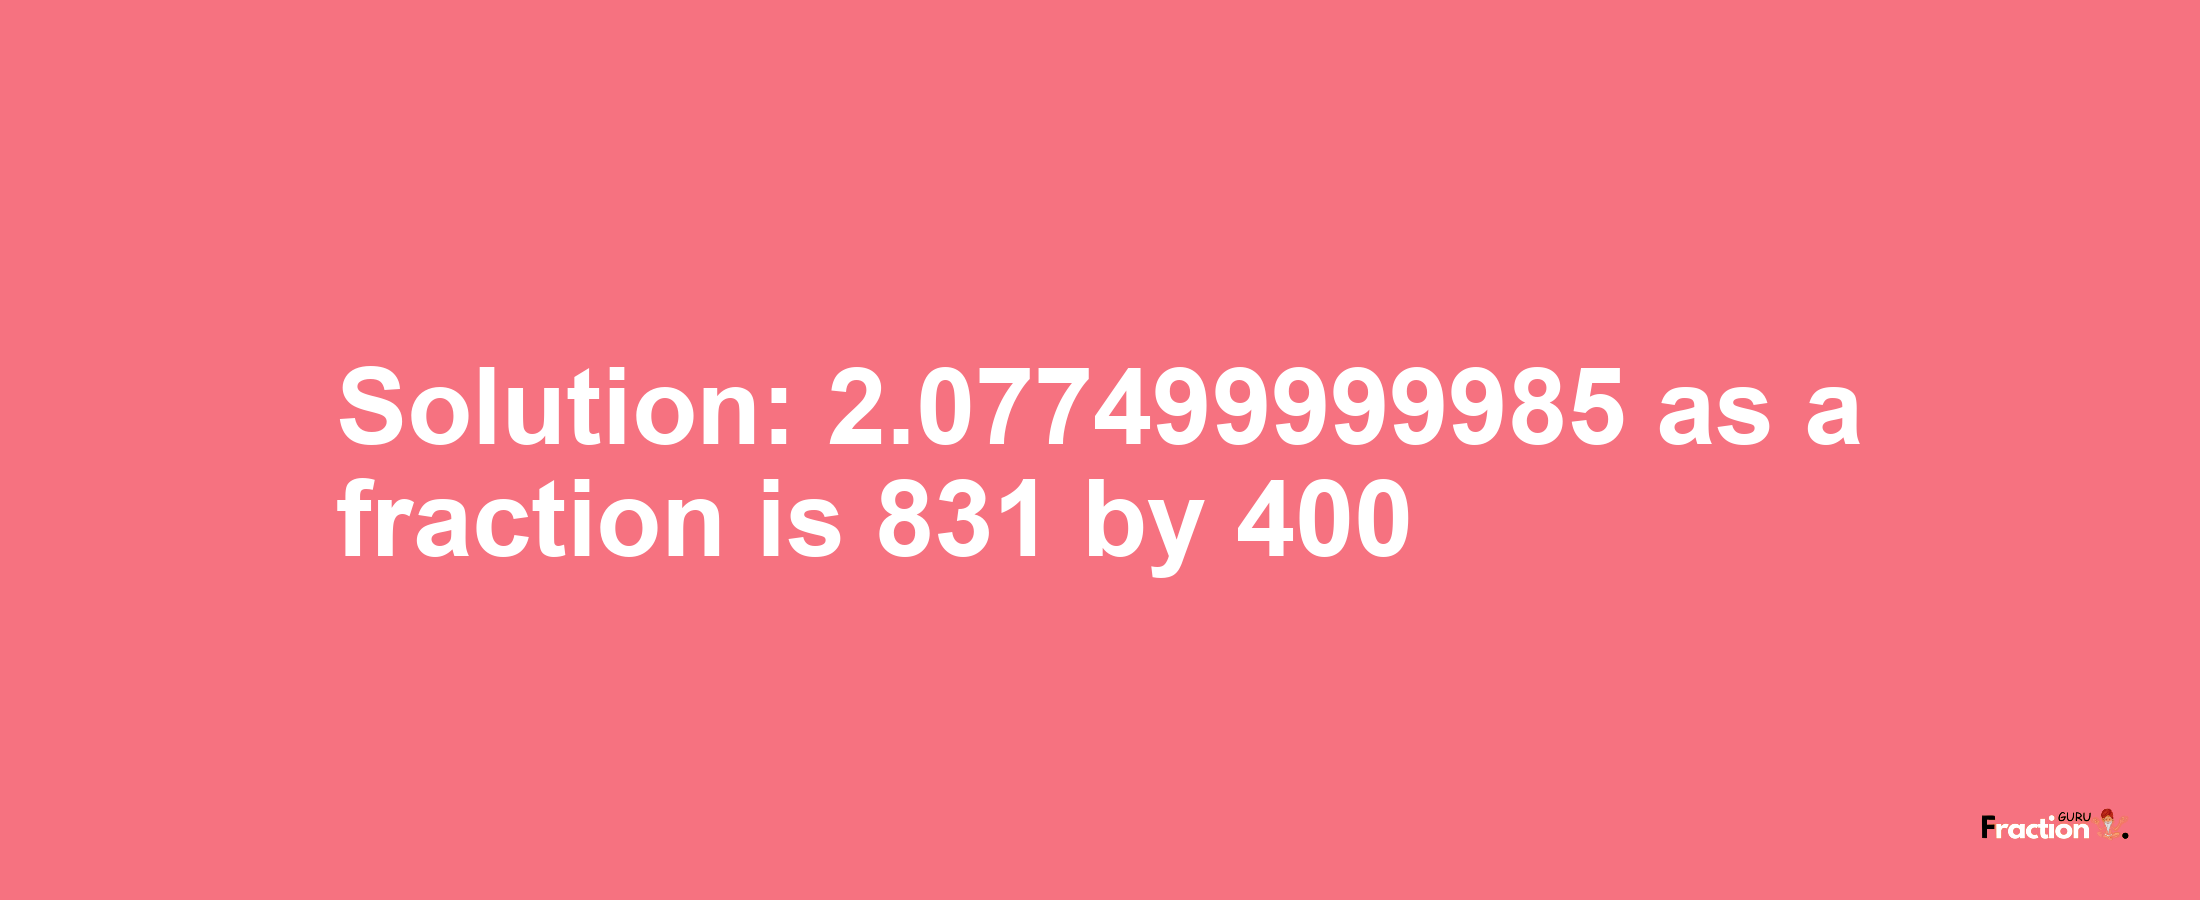 Solution:2.077499999985 as a fraction is 831/400